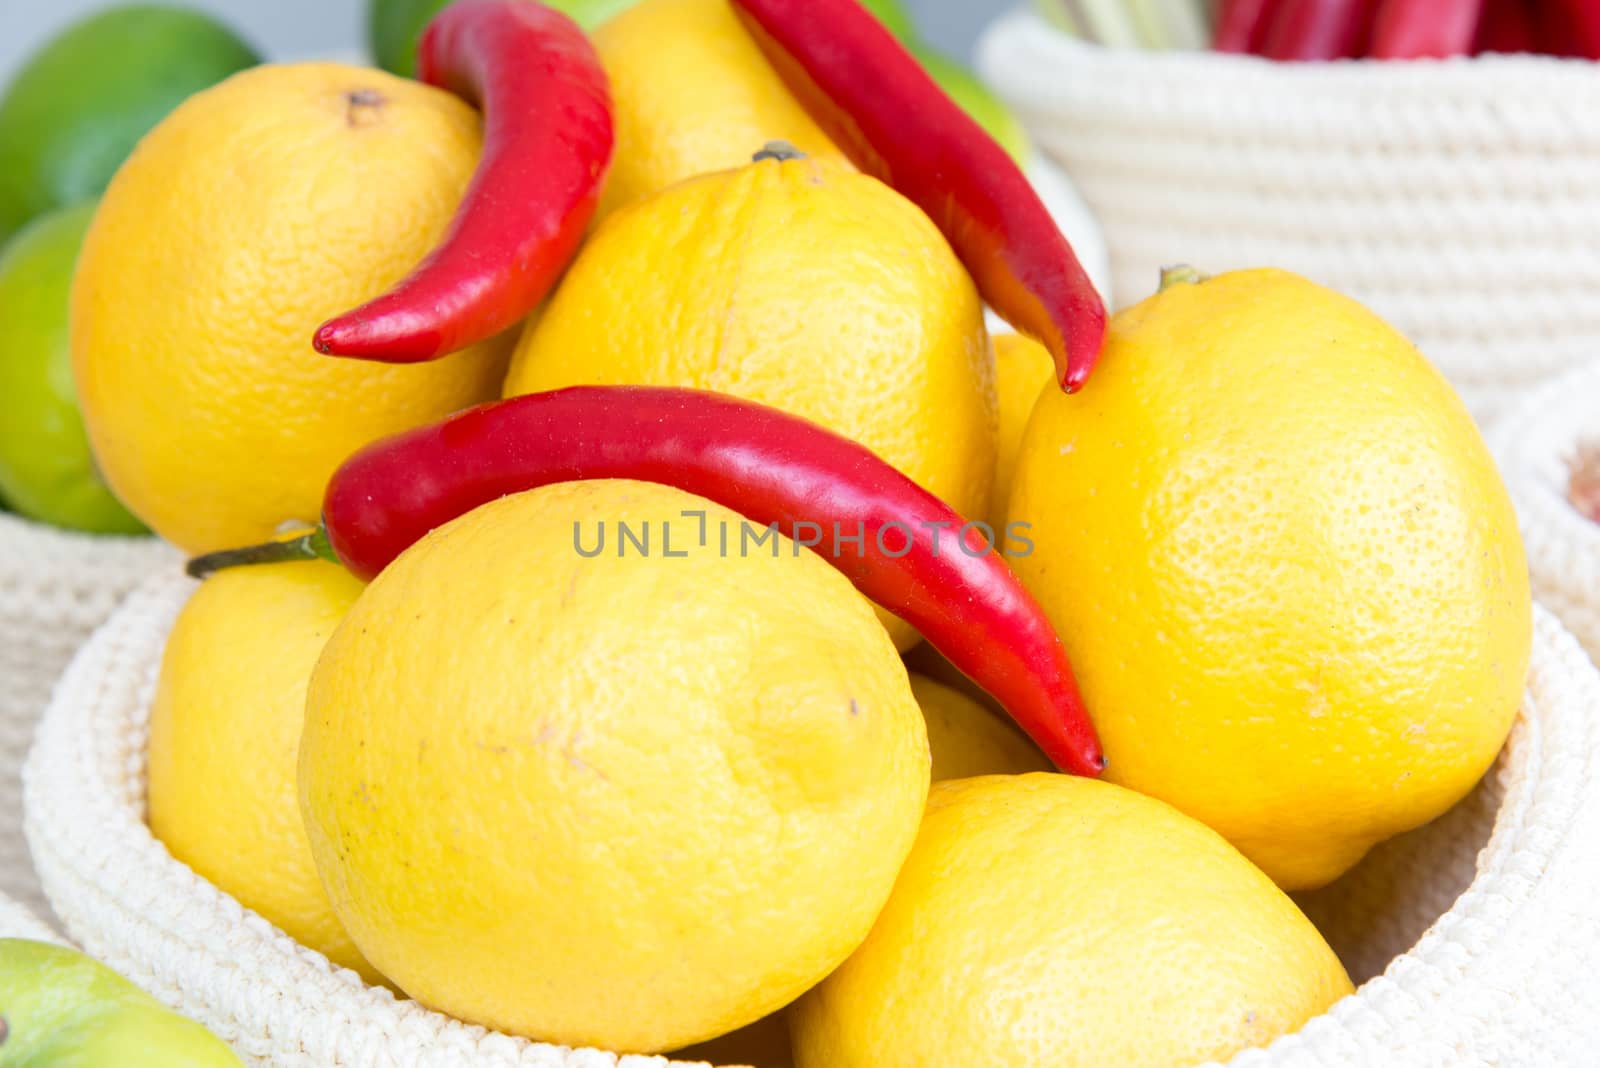 the lemons and chili peppers in a wicker basket close-up